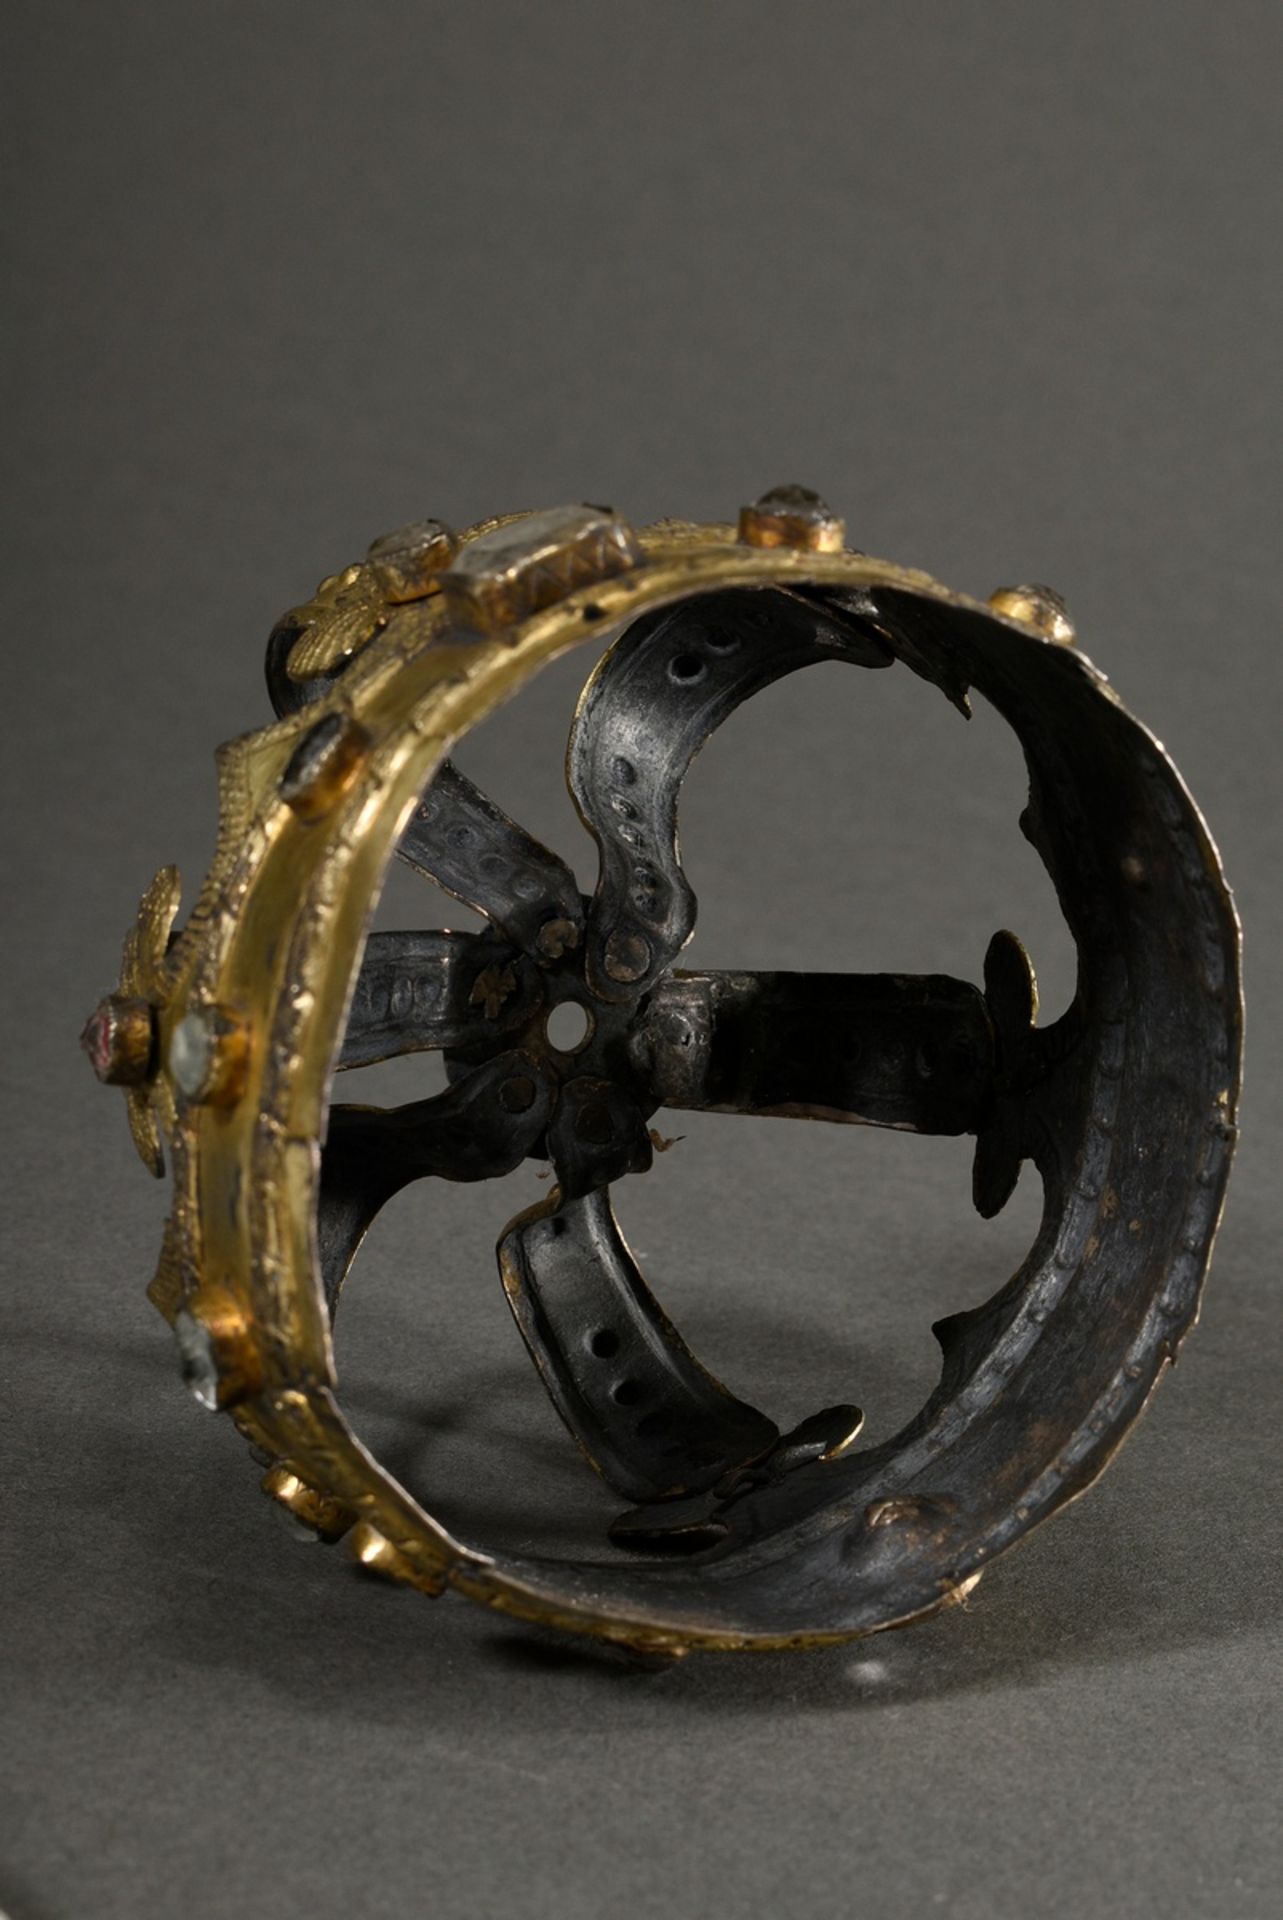 Antique crown of the Virgin Mary with glass stones, probably South German, 19th century, gilt metal - Image 4 of 9